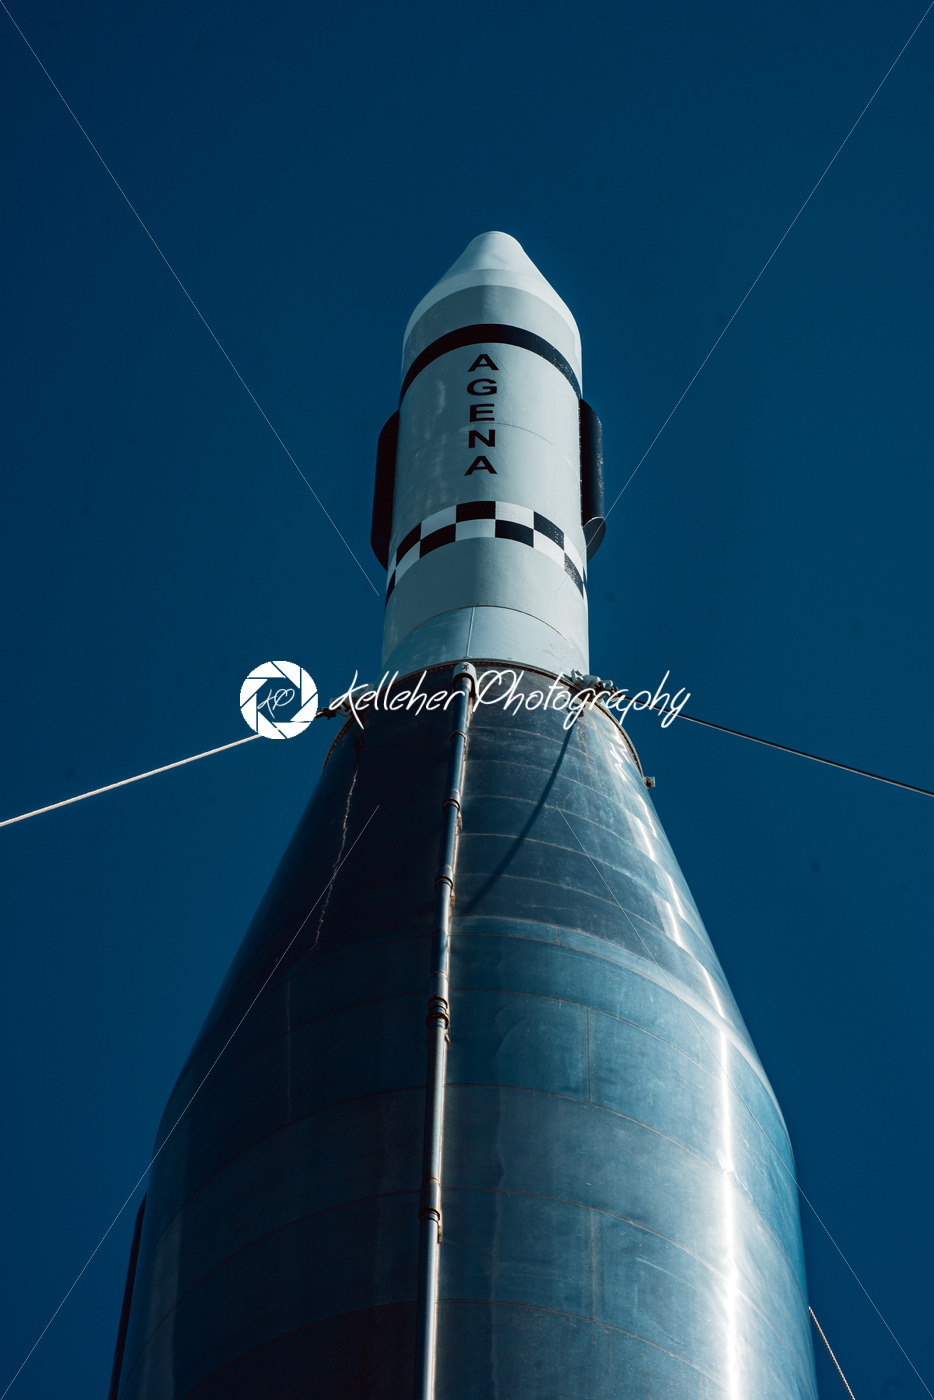 Cape Canaveral, Florida – August 13, 2018: Rocket Garden at NASA Kennedy Space Center - Kelleher Photography Store